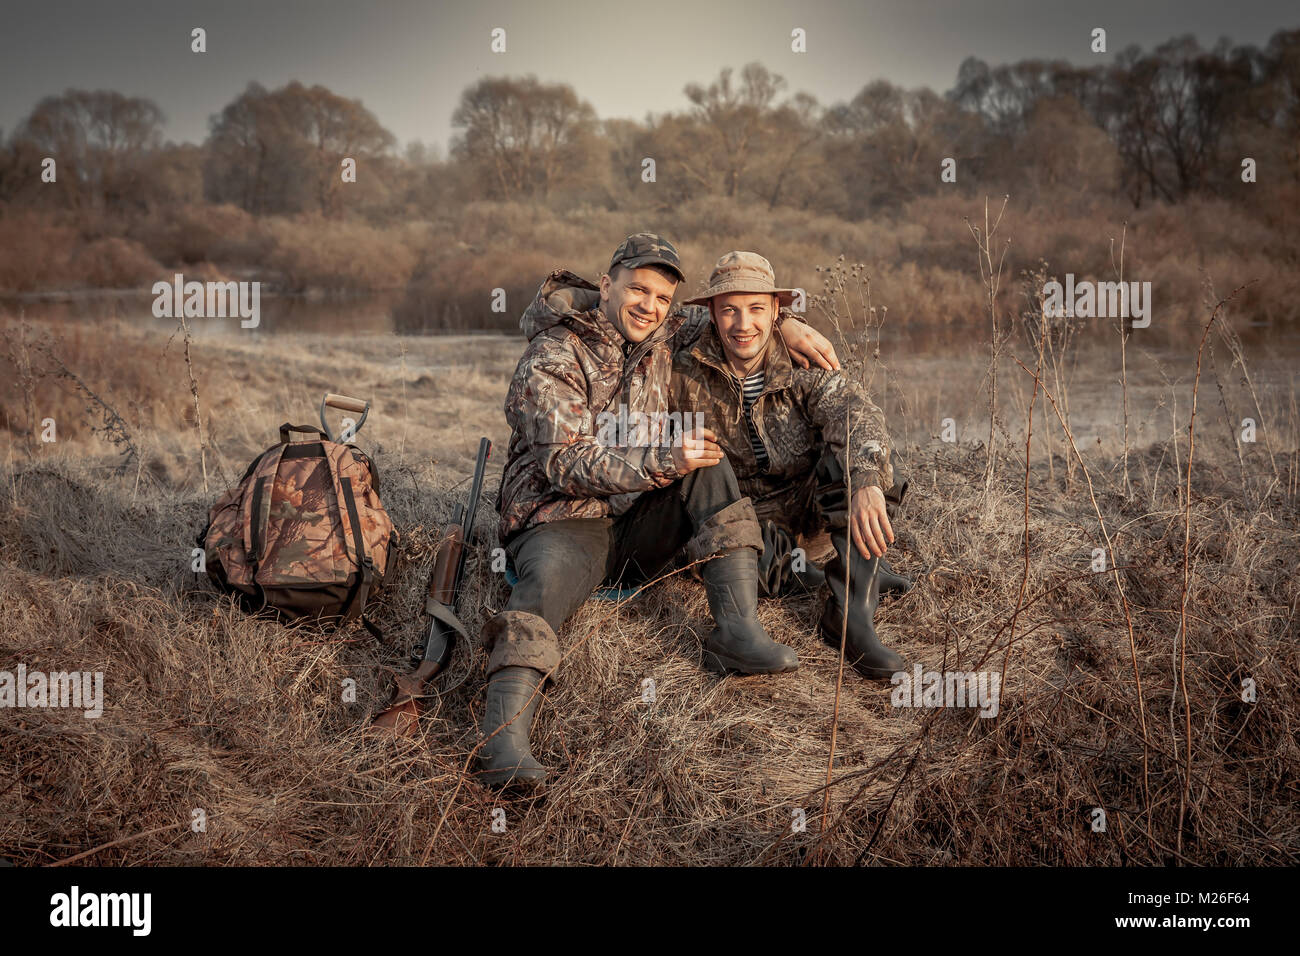 Hunter men friends resting in rural field during hunting period symbolizing strong friendship Stock Photo